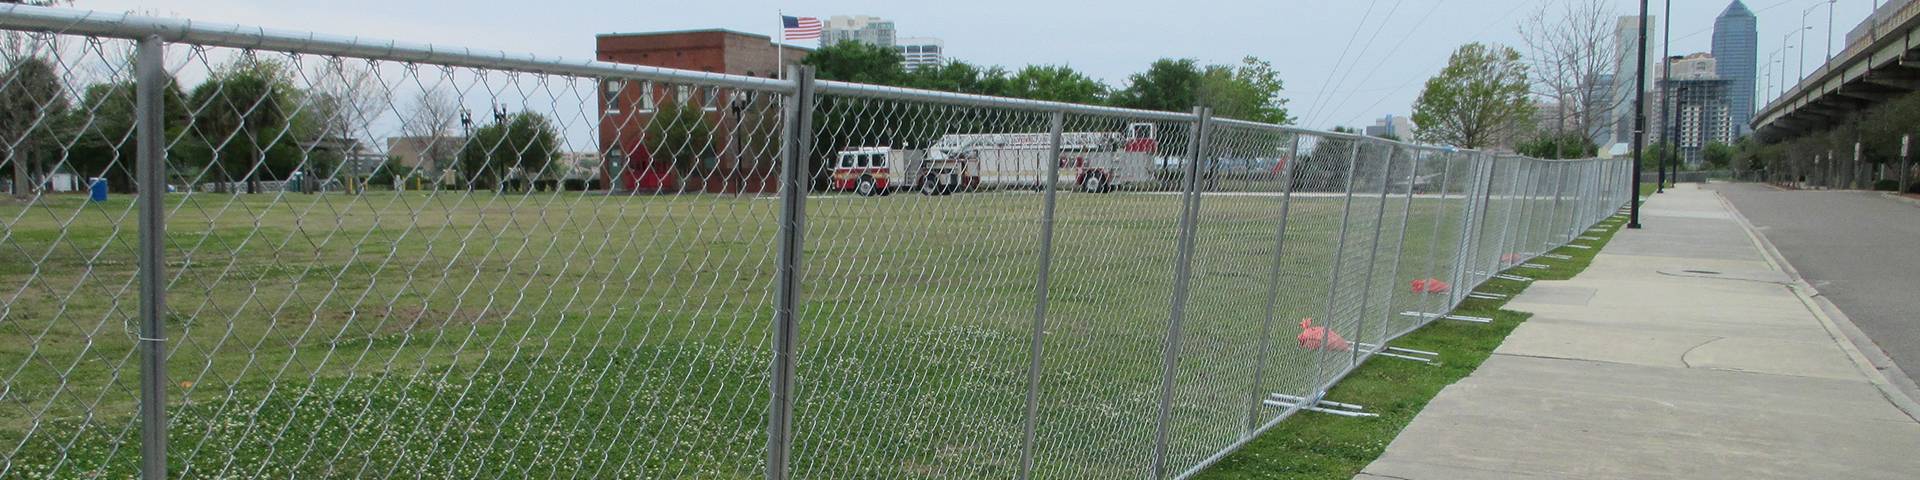 Temporary chain link fence are installed around the grassland.